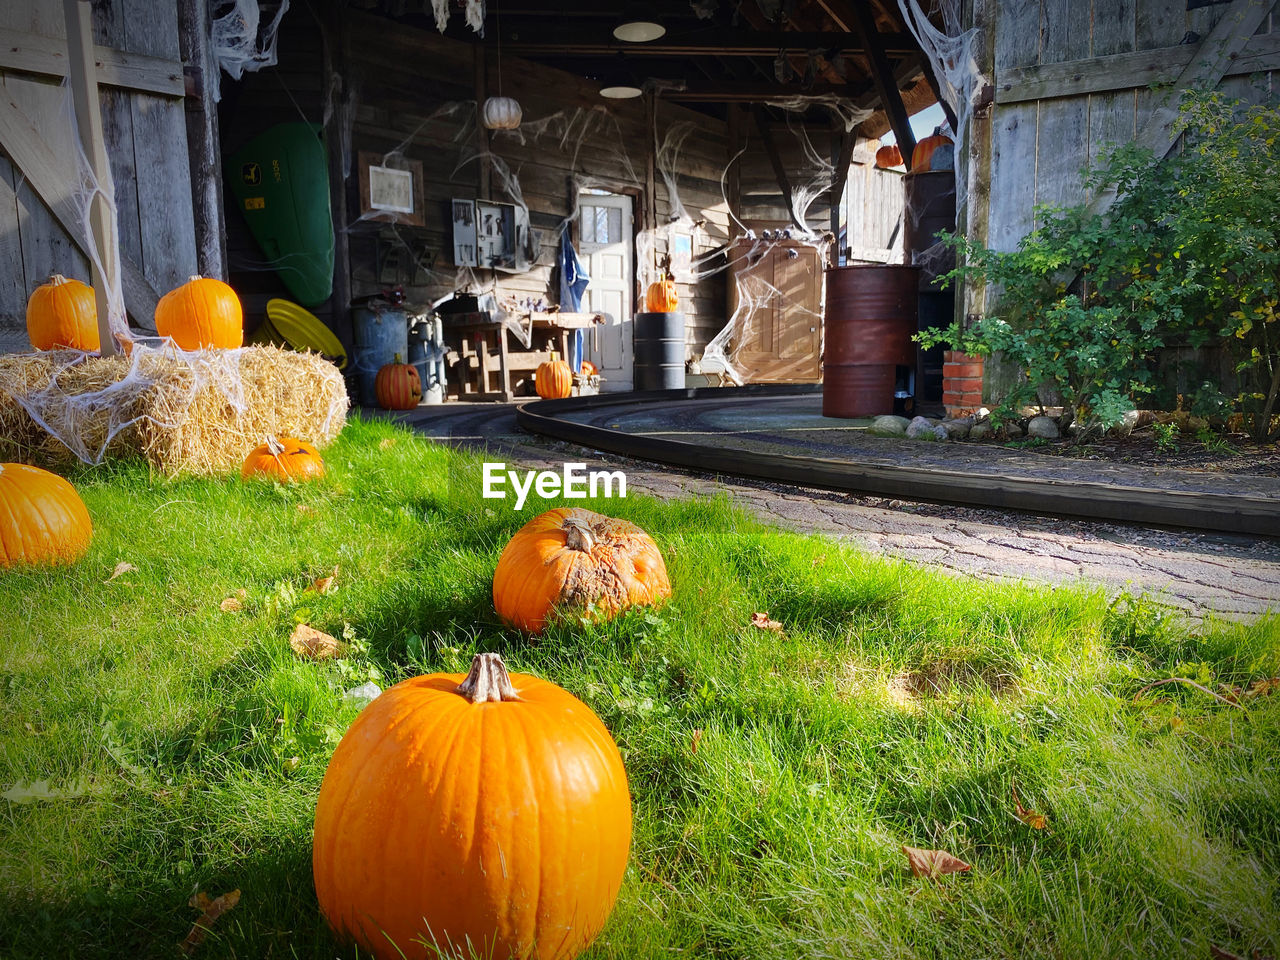 pumpkin, halloween, food, food and drink, plant, celebration, grass, vegetable, nature, autumn, architecture, holiday, no people, orange color, built structure, day, building exterior, jack-o'-lantern, tradition, outdoors, freshness, agriculture, healthy eating, decoration, building, field, growth